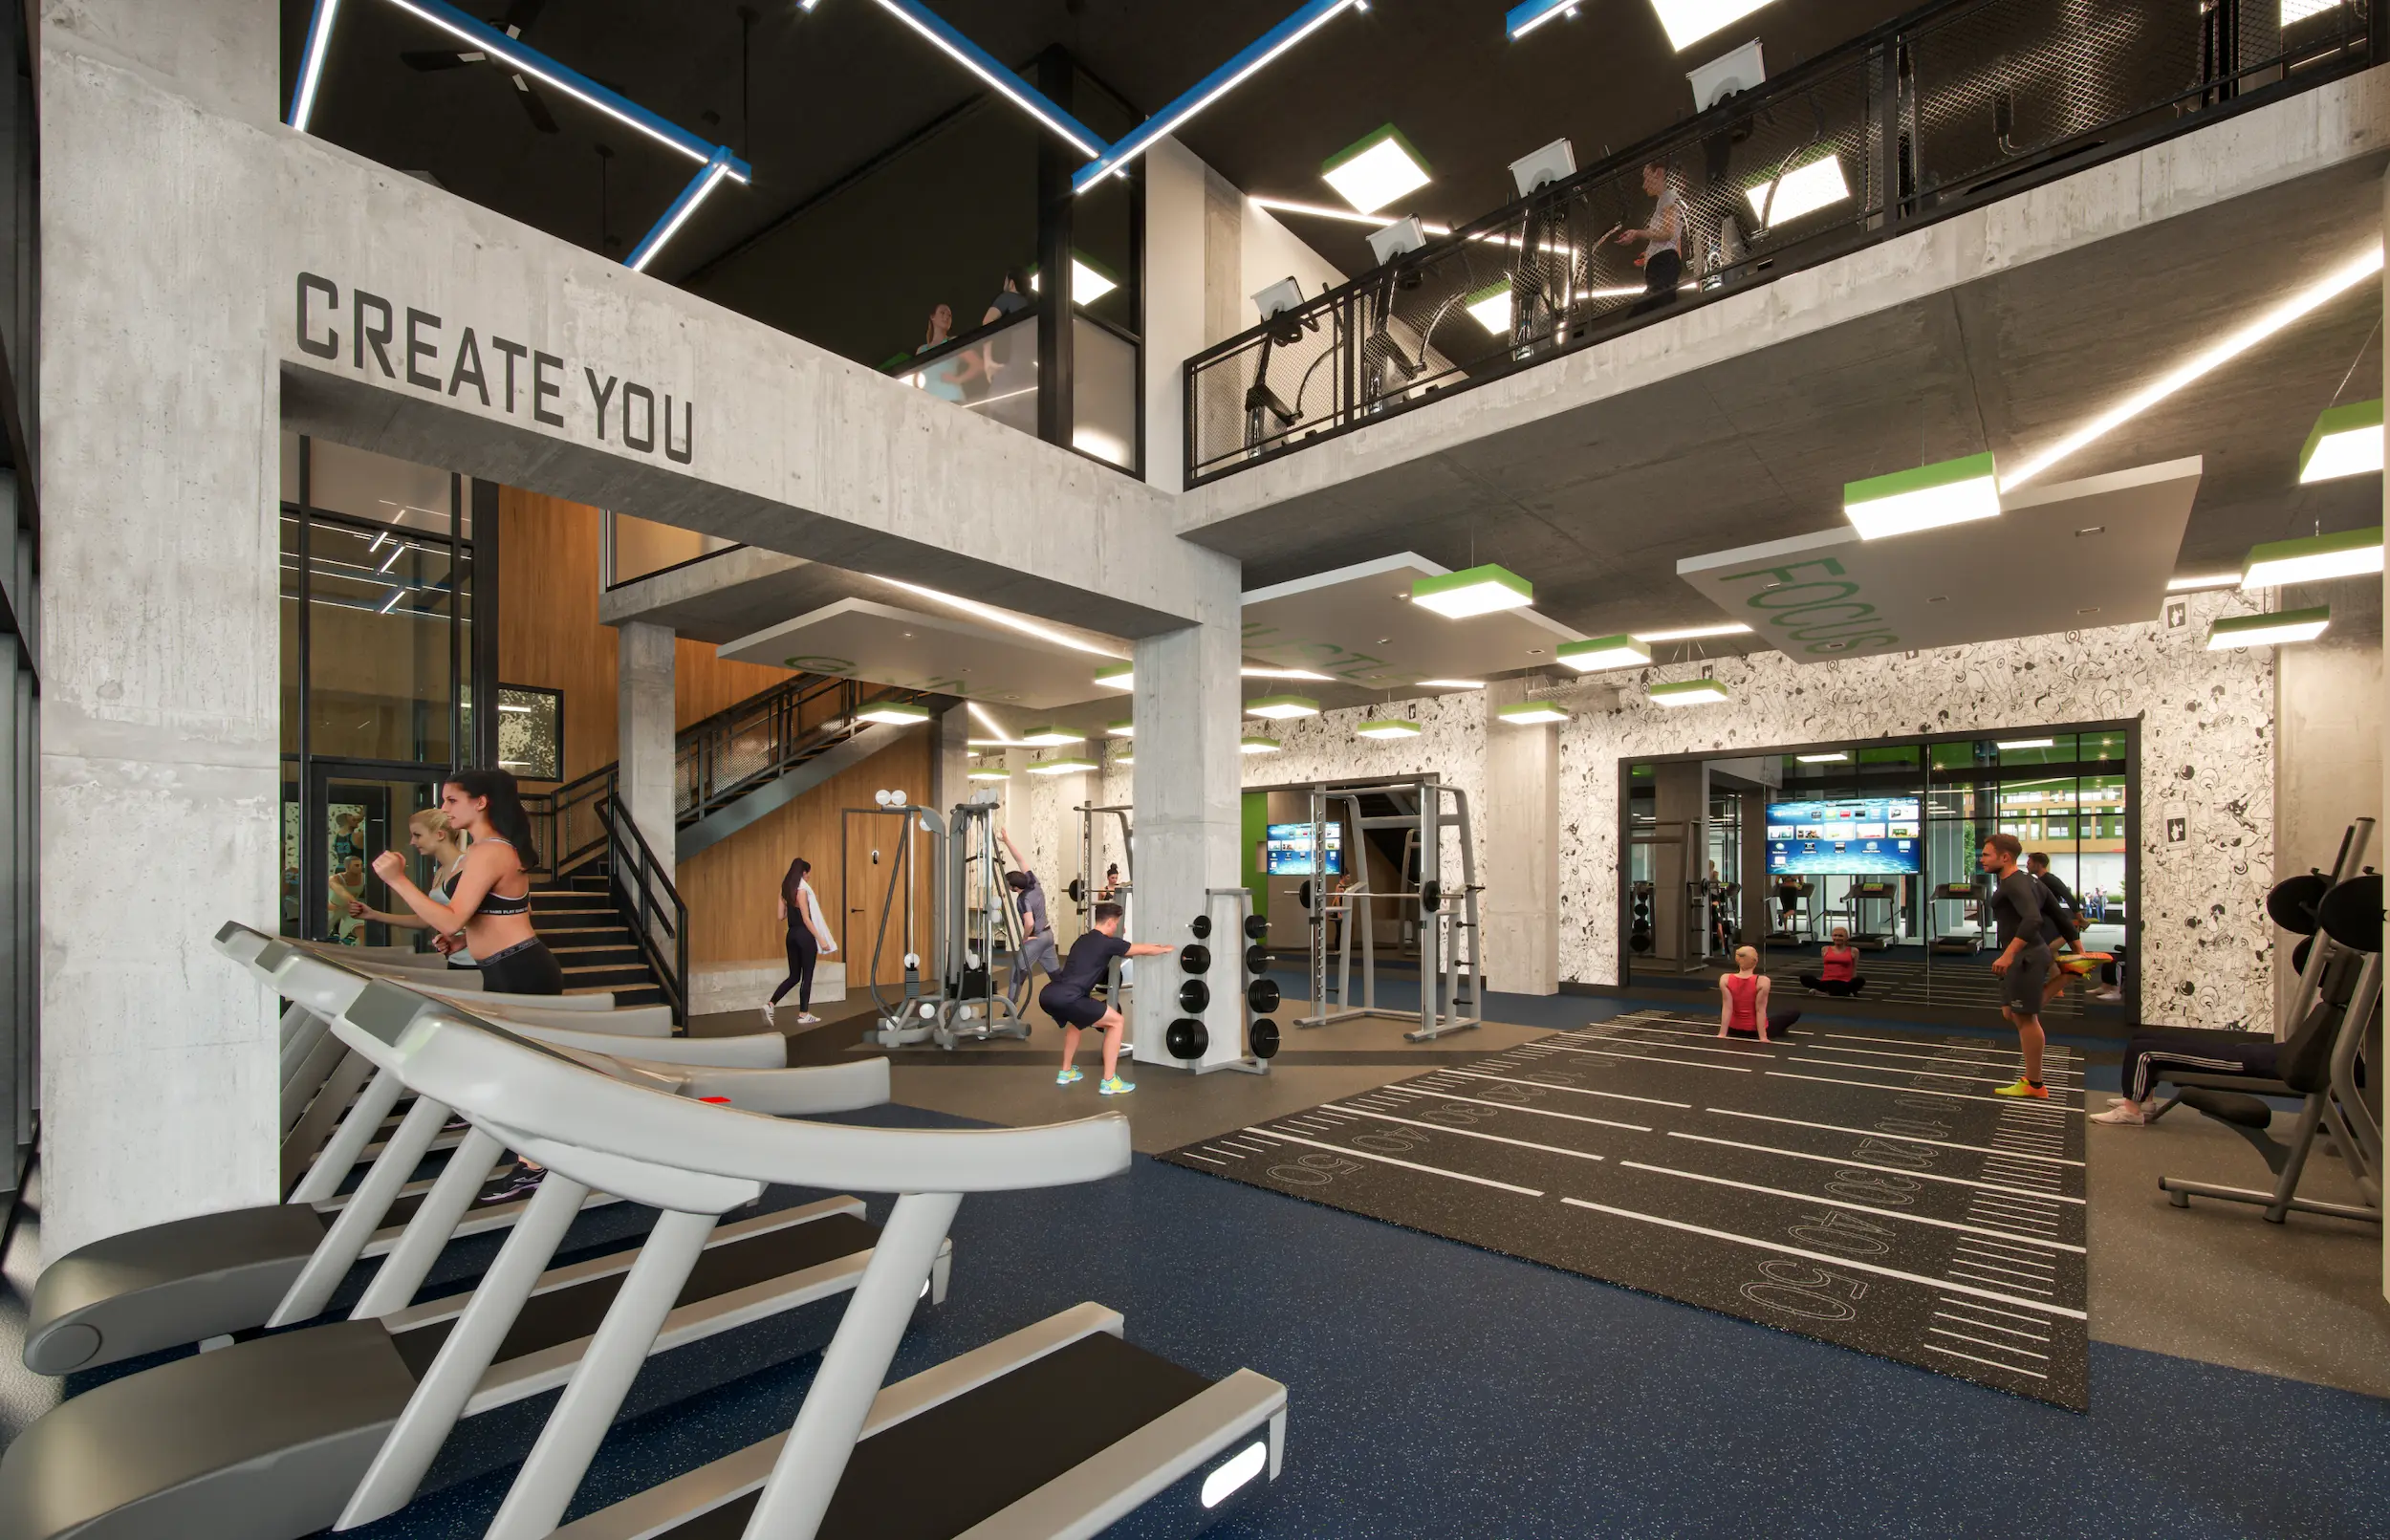 Interior View of Two-Story Fitness Center Showing People Running on Treadmills, Lifting Weights, and Stretching on Floor Mats